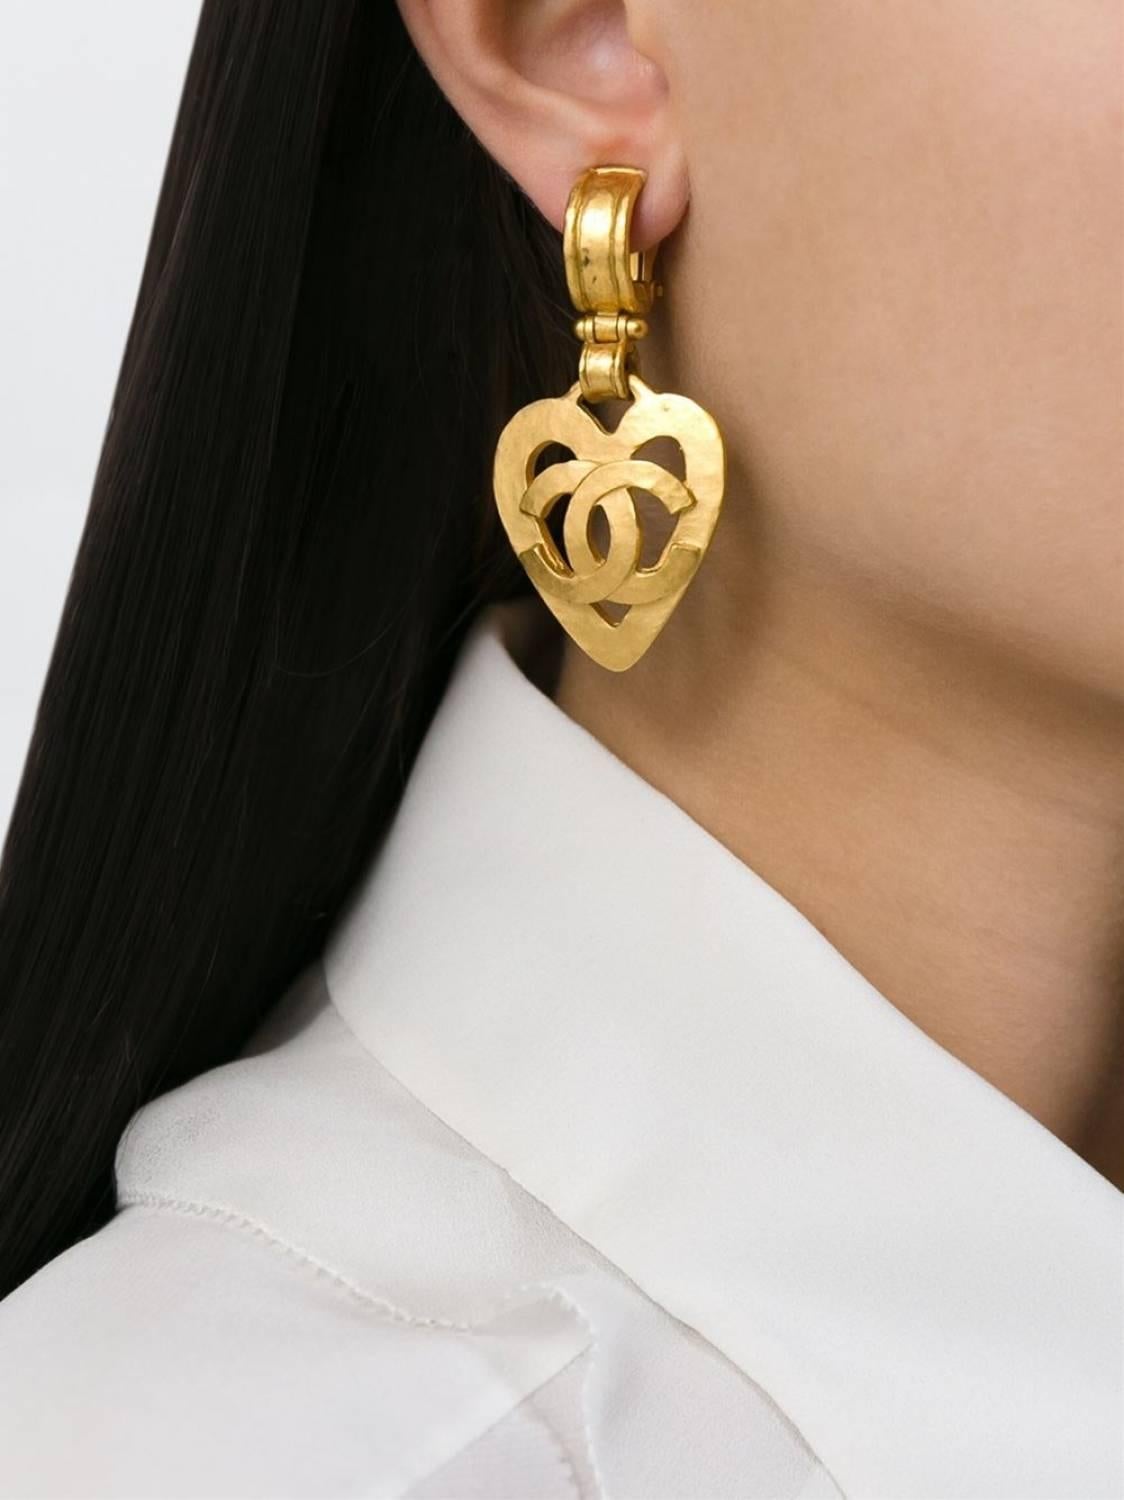 CURATOR'S NOTES

Be the Queen of Hearts and Chanel with these fab Chanel gold tone heart earrings.

Metal
Gold plated
Clip on
Made in France
Measures 2.8